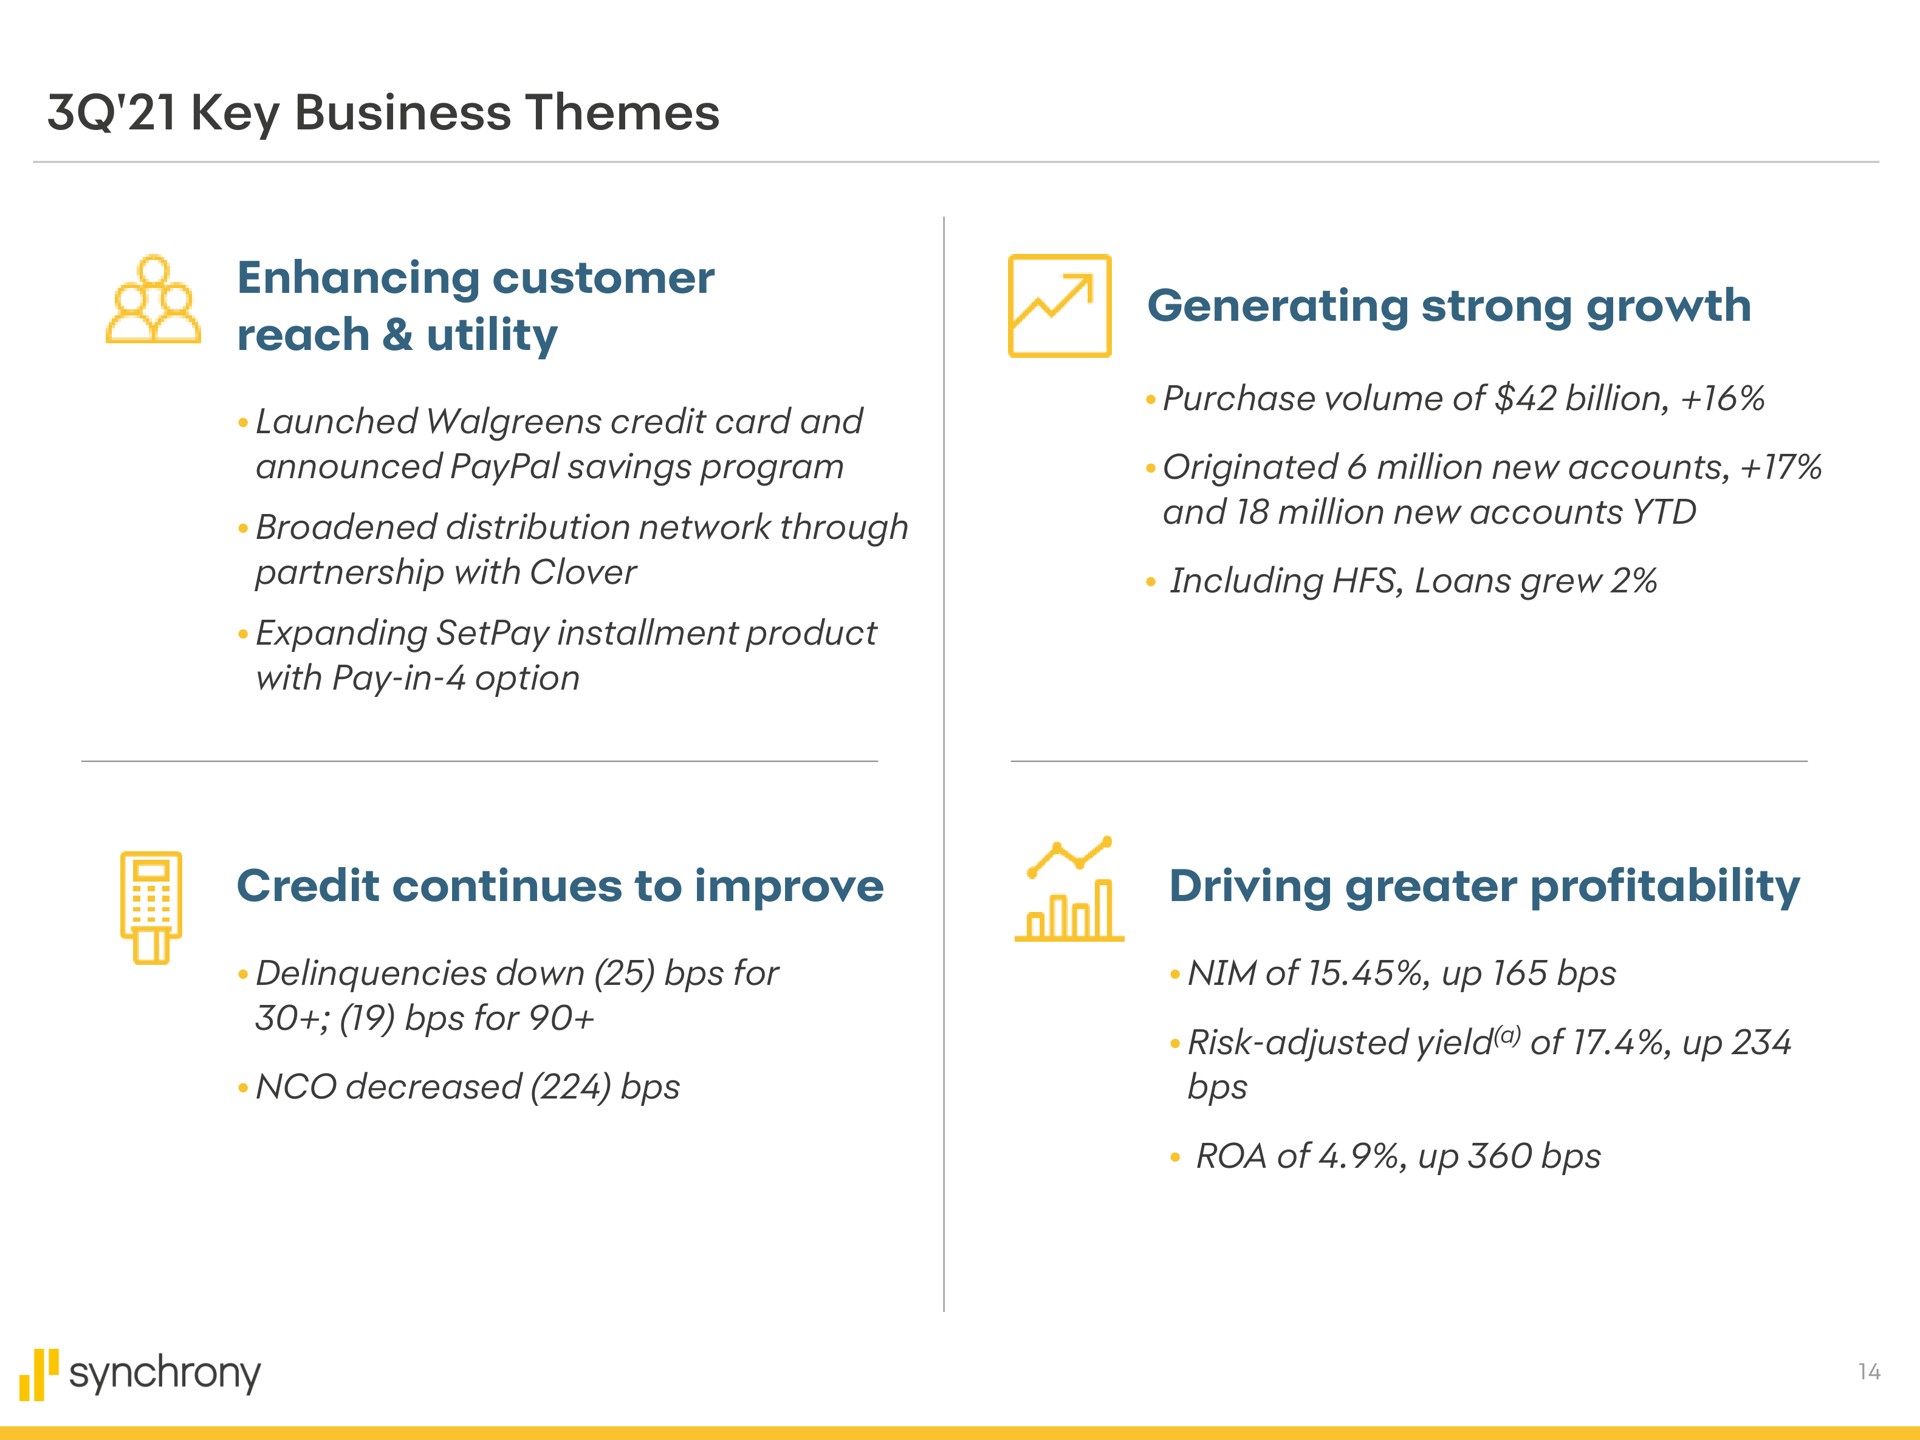 key business themes enhancing customer reach utility launched credit card and announced savings program broadened distribution network through partnership with clover expanding installment product with pay in option generating strong growth purchase volume of billion originated million new accounts and million new accounts including loans grew credit continues to improve driving greater profitability delinquencies down for for decreased nim of up risk adjusted yield a of up of up synchrony | Synchrony Financial